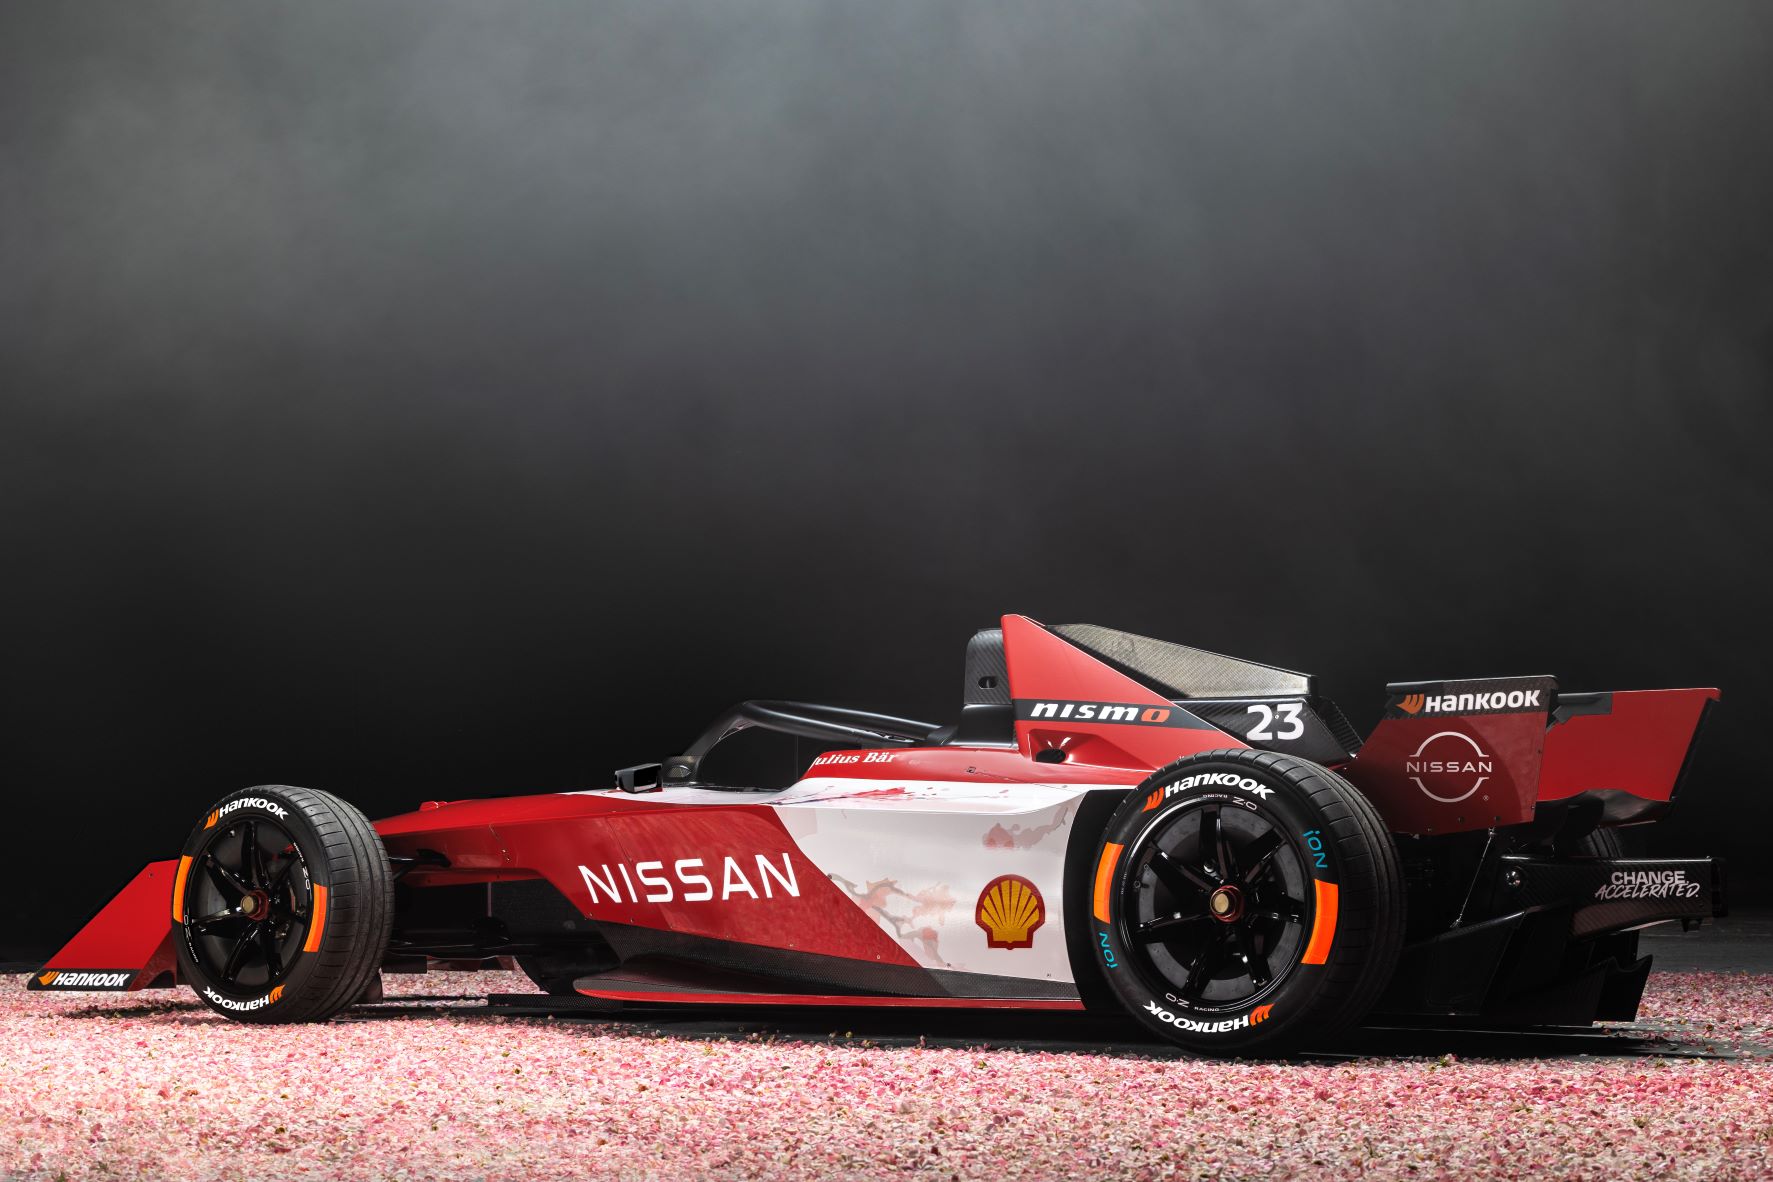 Rear three quarters view of the Team Nissan Formula E Gen3 racecar in red and white.